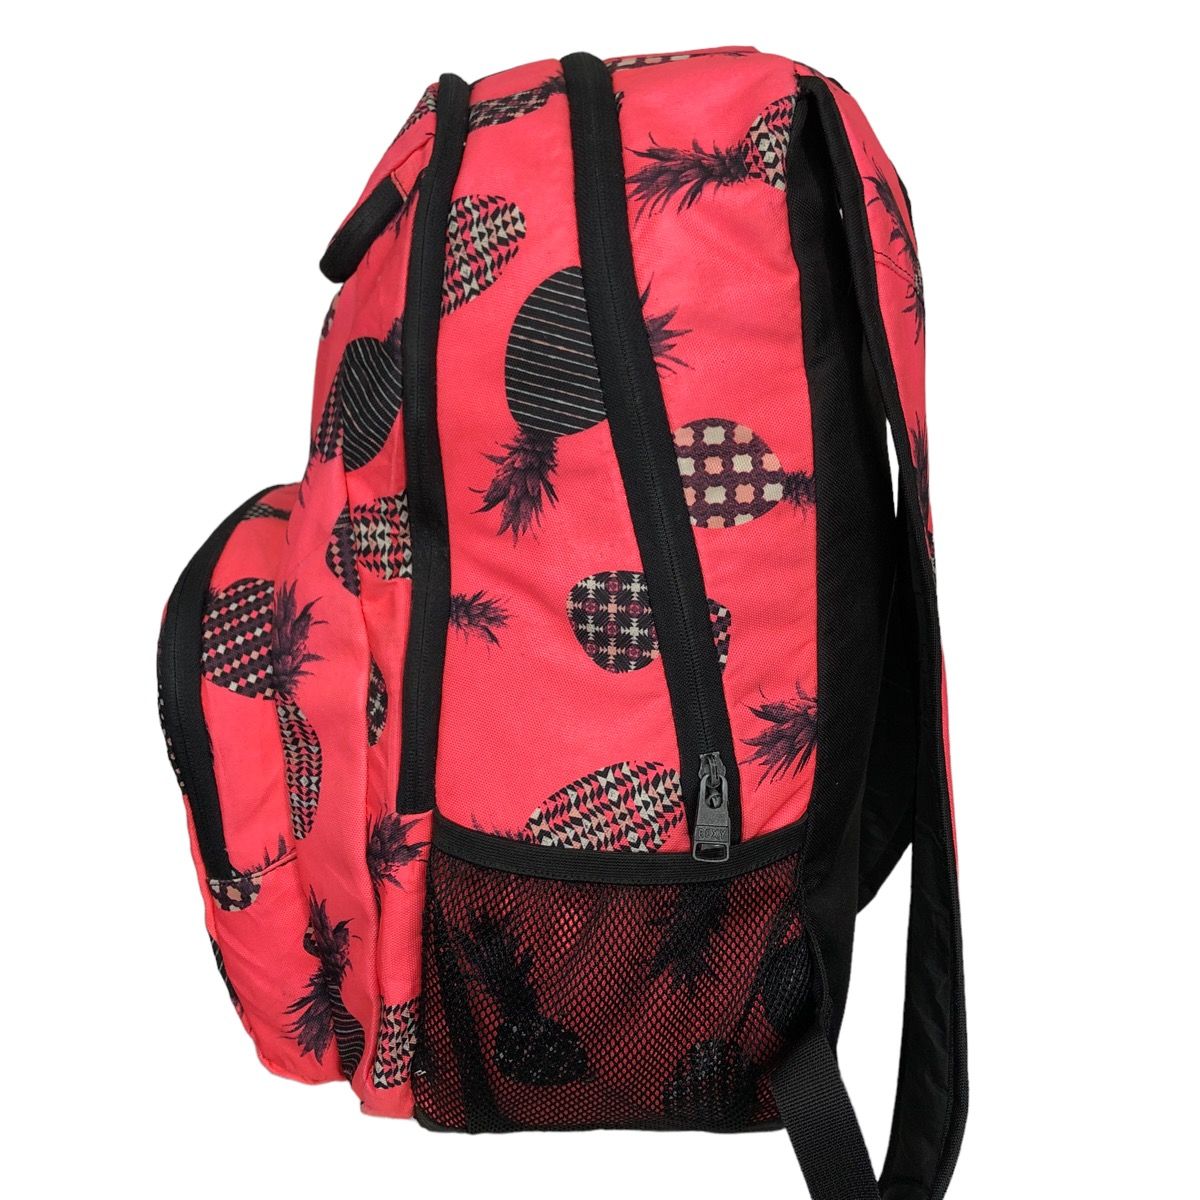 Quicksilver - Roxy Pineapple Backpack - 5